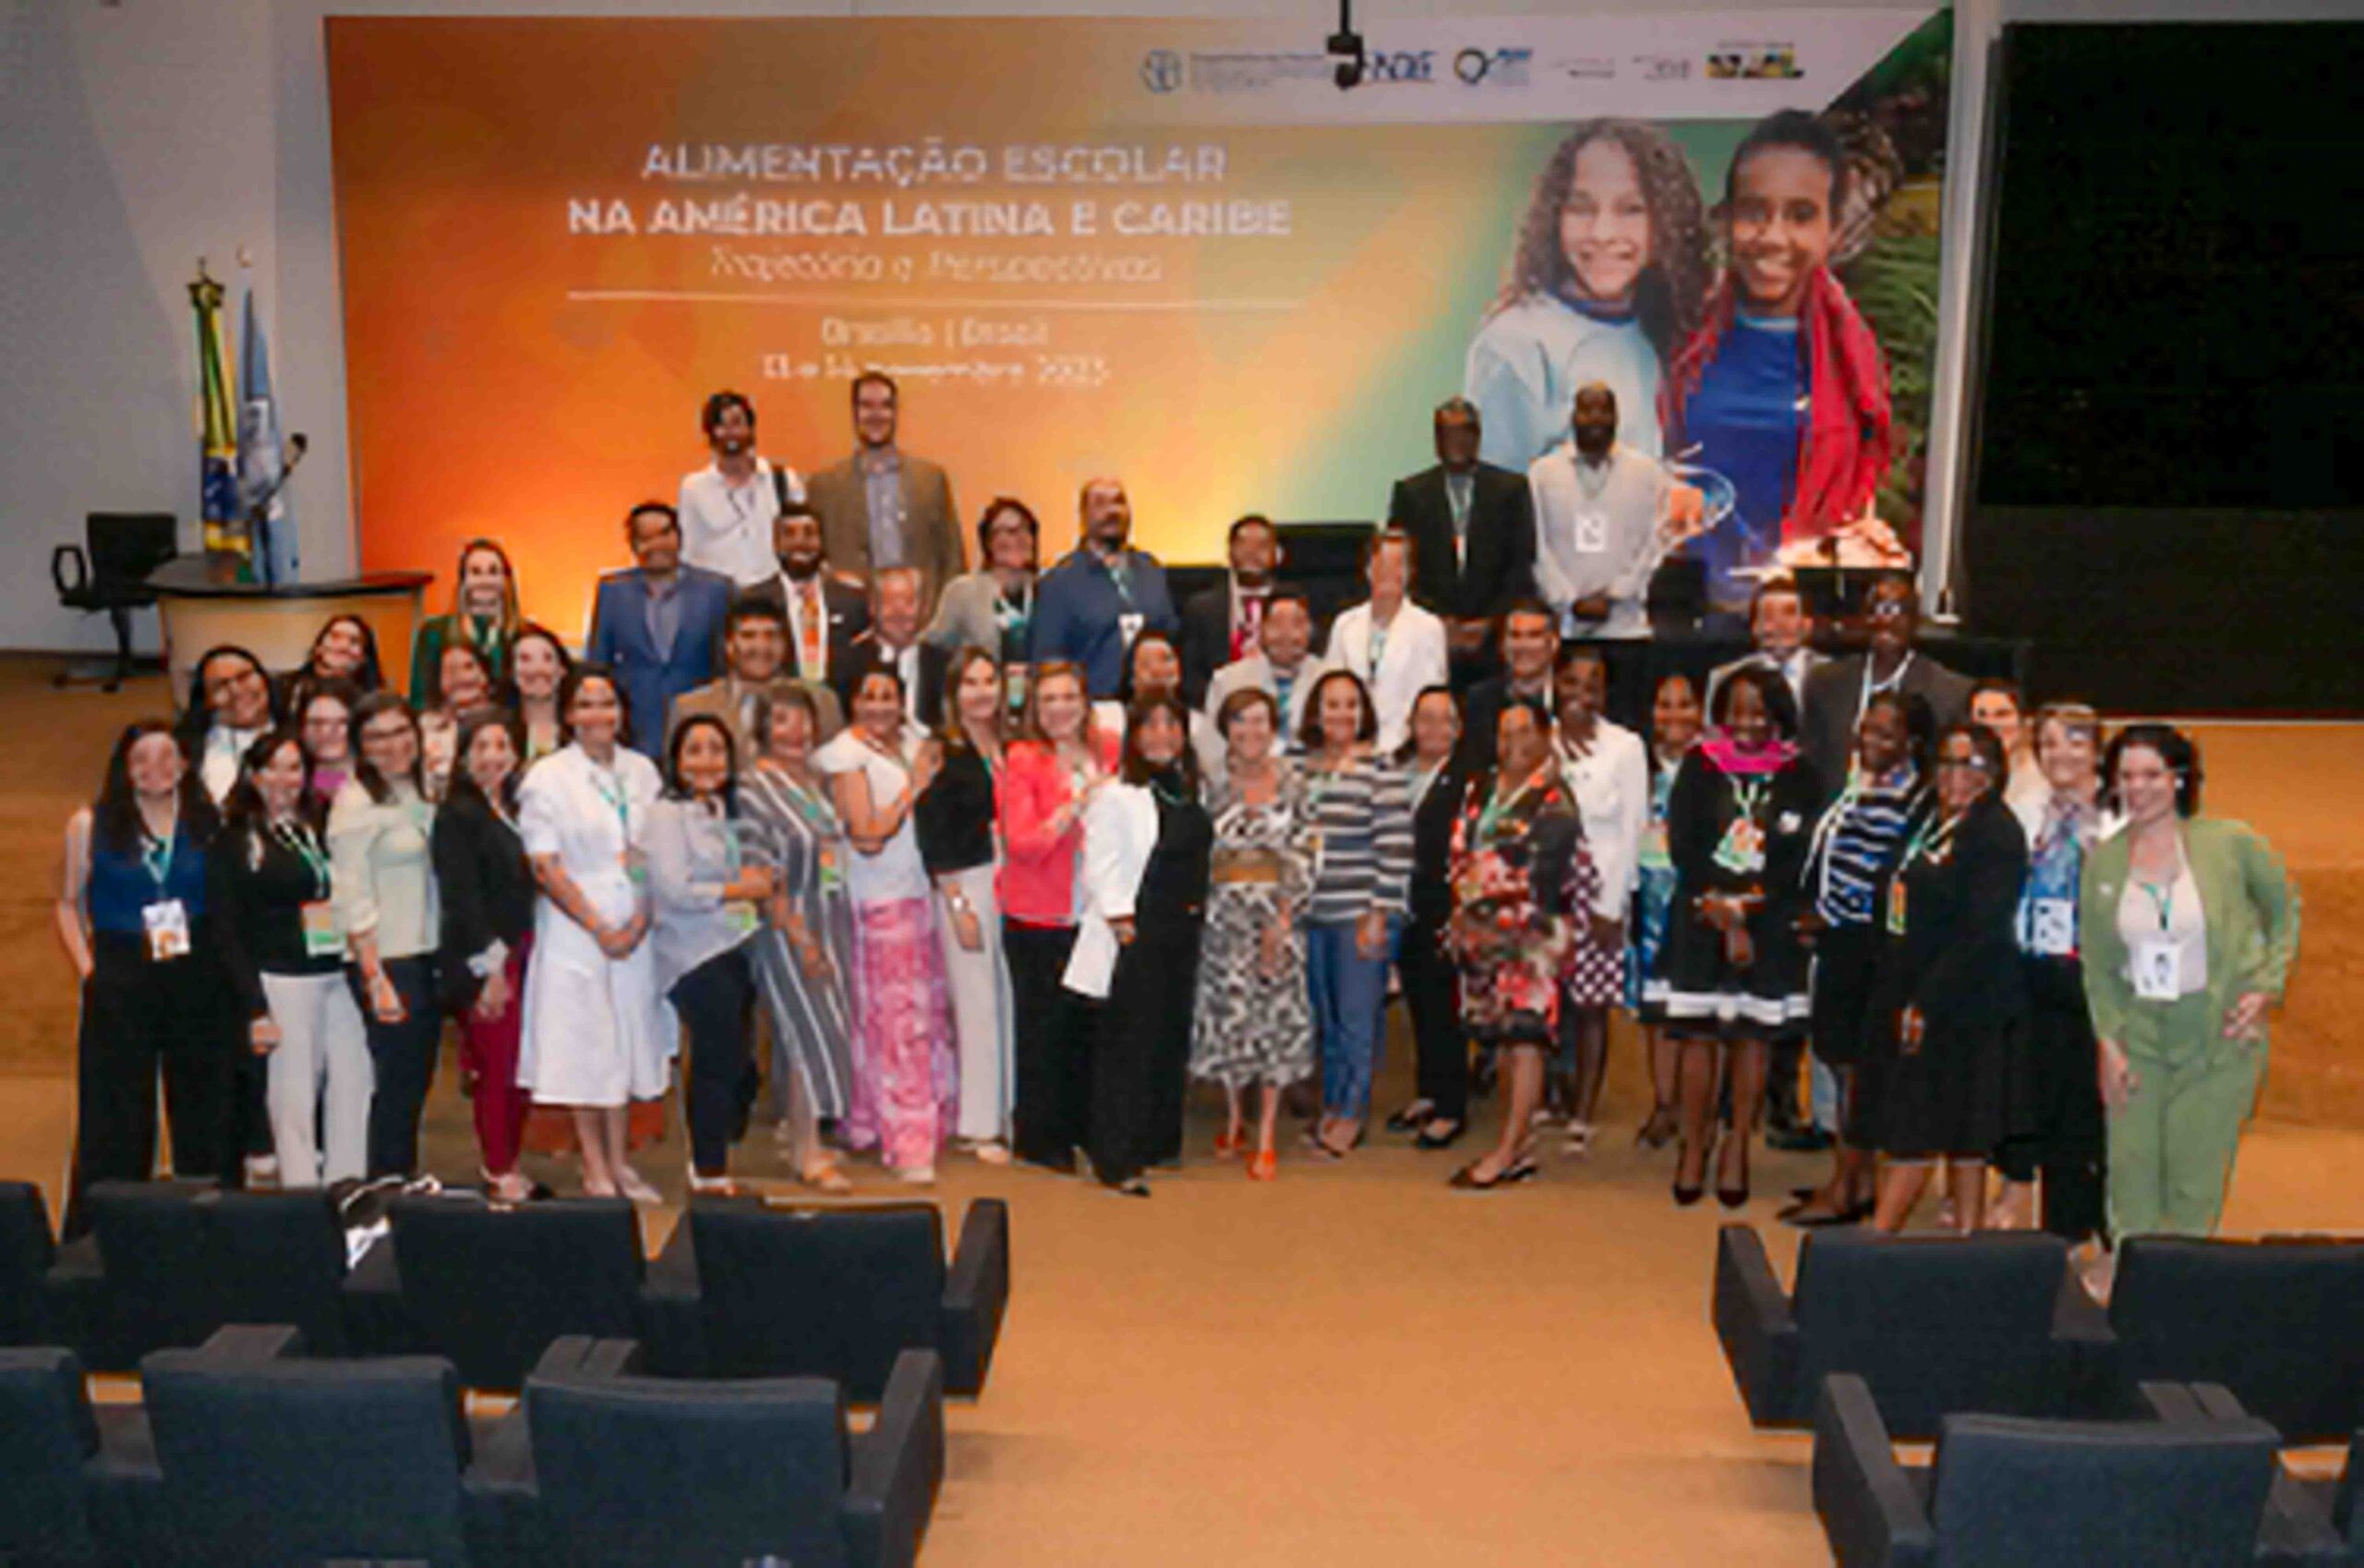 FAO, Brazil, and 18 Countries Celebrate the 14 Years of International Cooperation in School Feeding